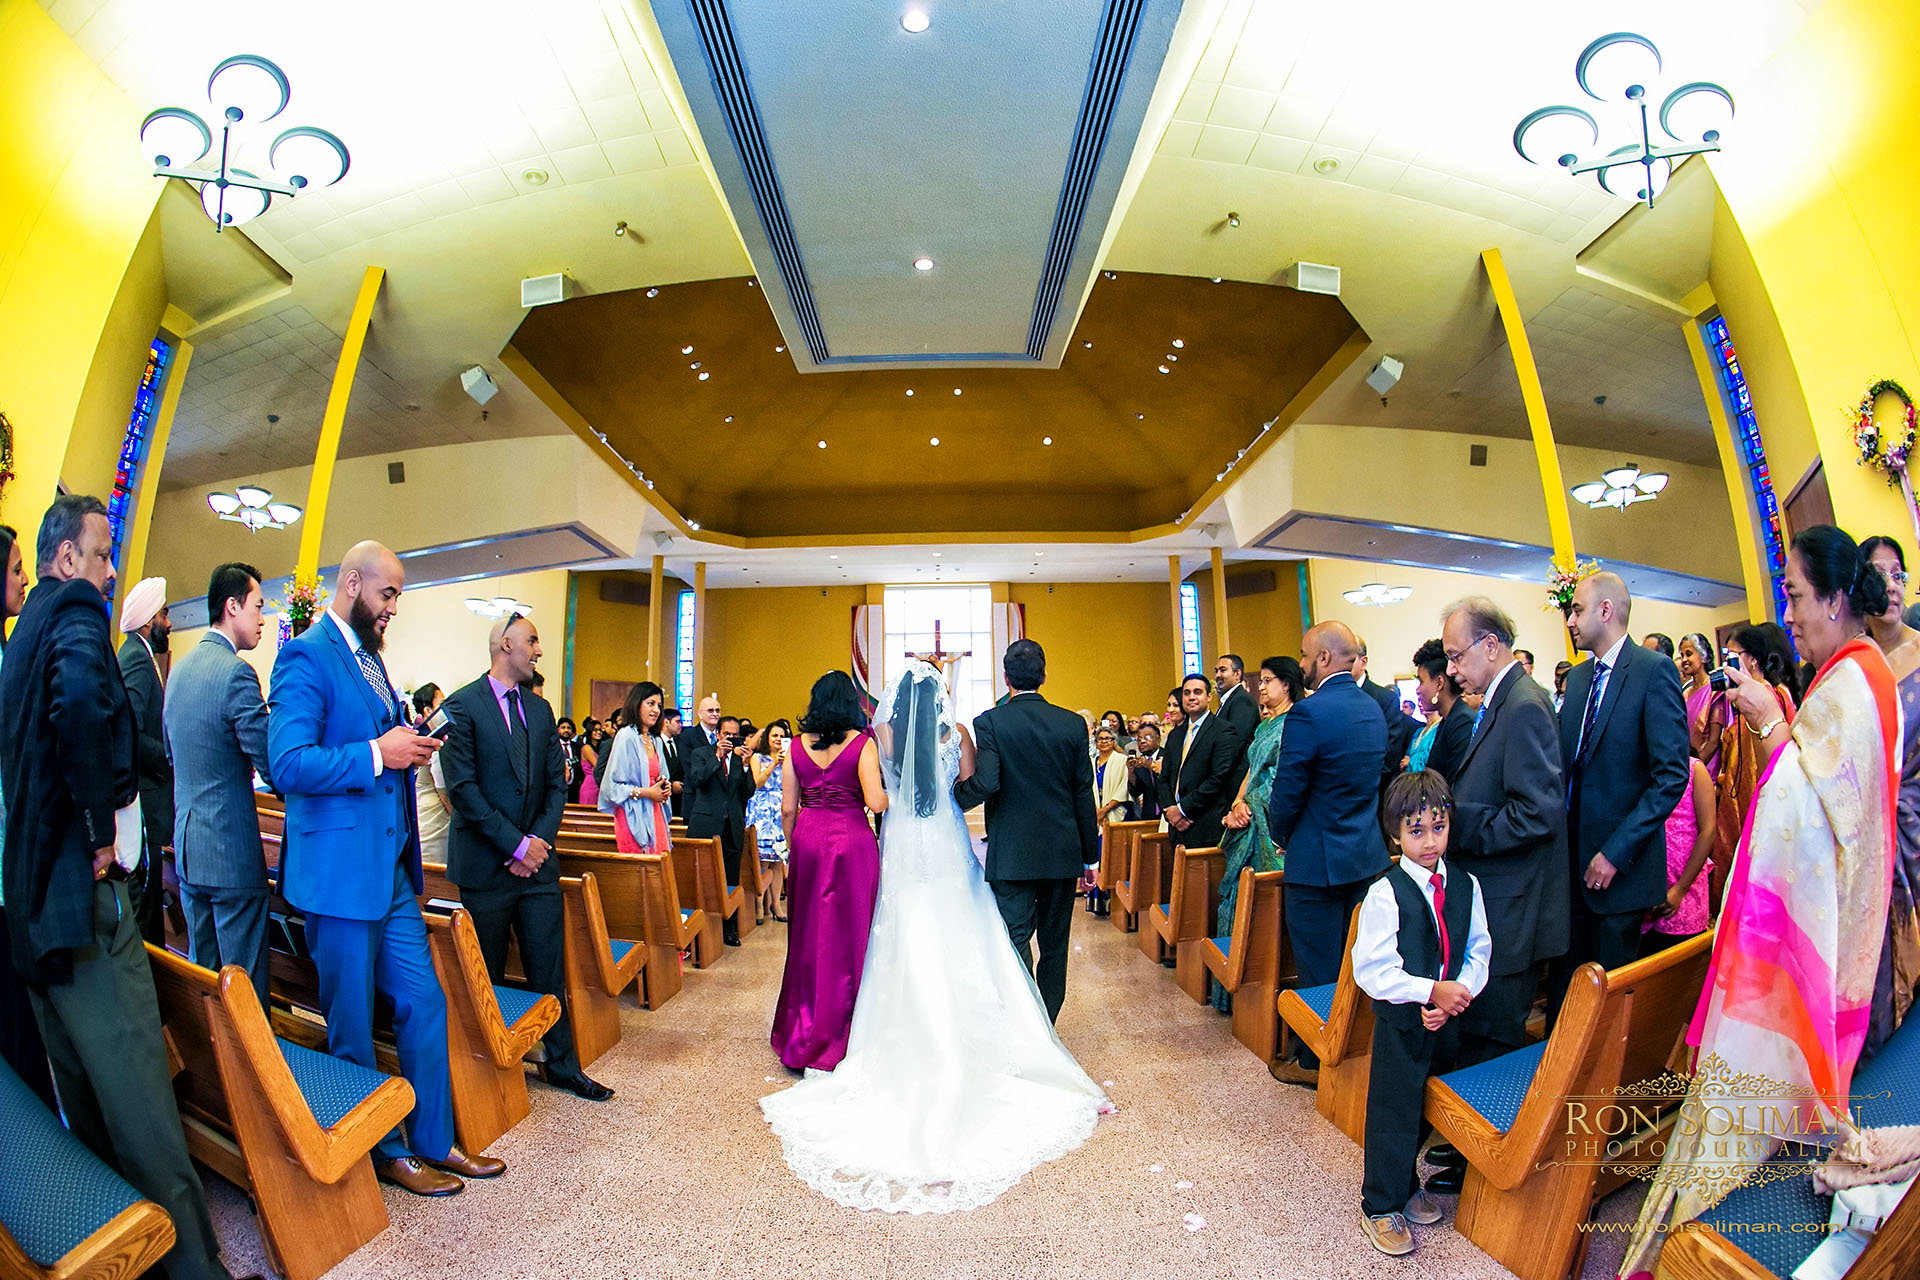 wedding photos at Christ our light catholic church in Cherry Hill, new jersey